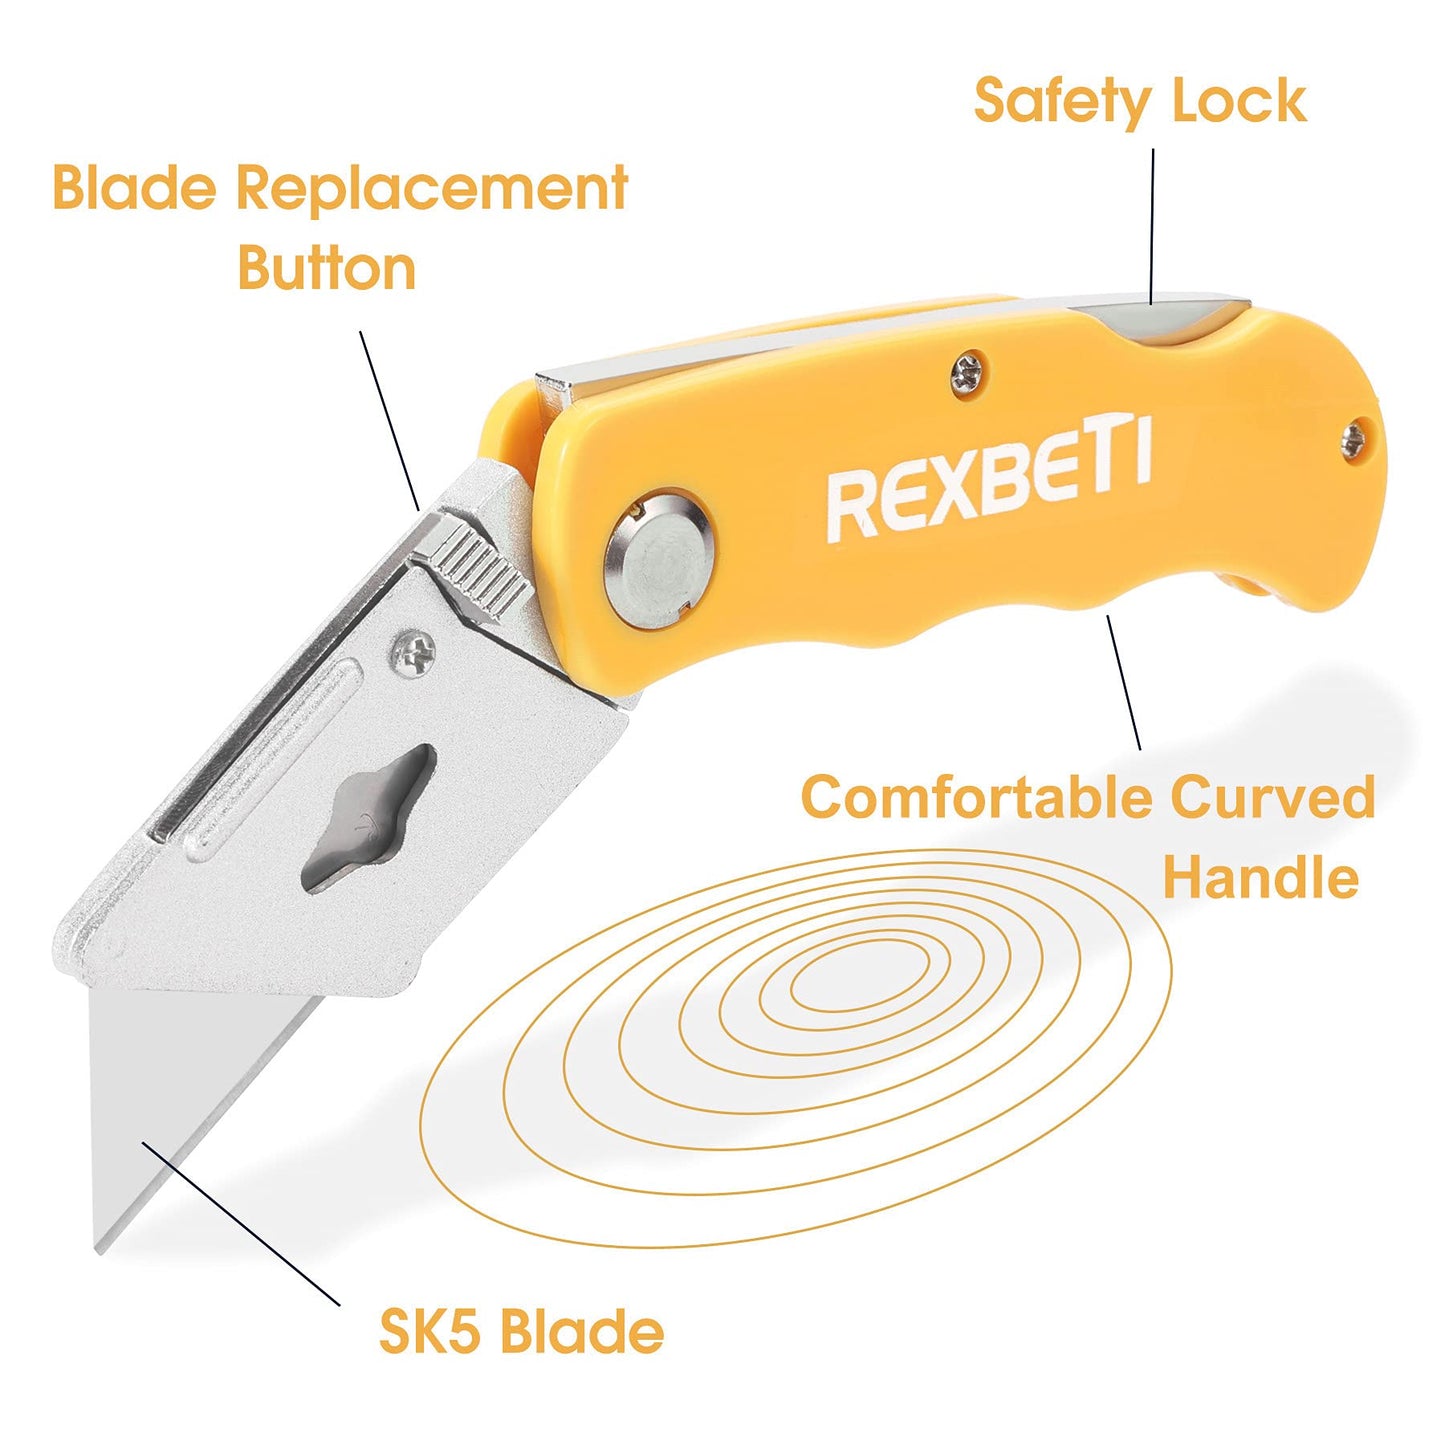 REXBETI 4-Pack Folding Utility Knife Quick-change SK5 Box Cutter for Cartons, Cardboard and Boxes, Back-lock Mechanism with 10 Extra Blades